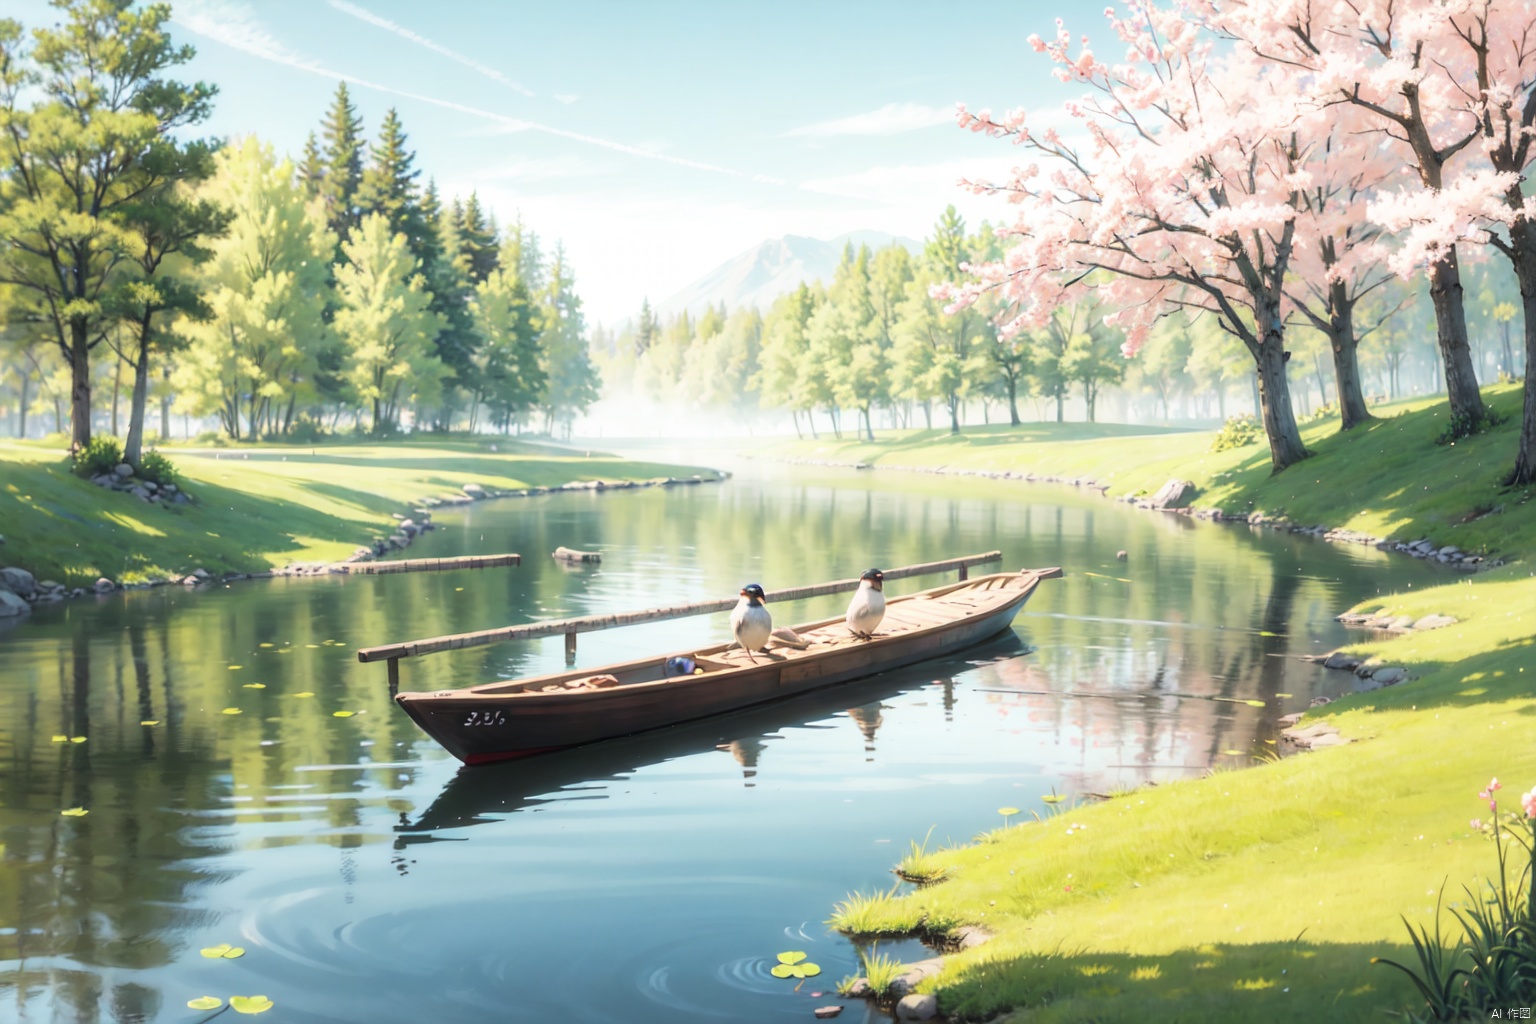 capture a serene early spring scene on a misty lake a wooden boat. trees with fresh green buds line the shore. above, a pair of swallows fly among young willow branches. the atmosphere is calm and expectant, signaling the awakening of nature, gf, ycbh